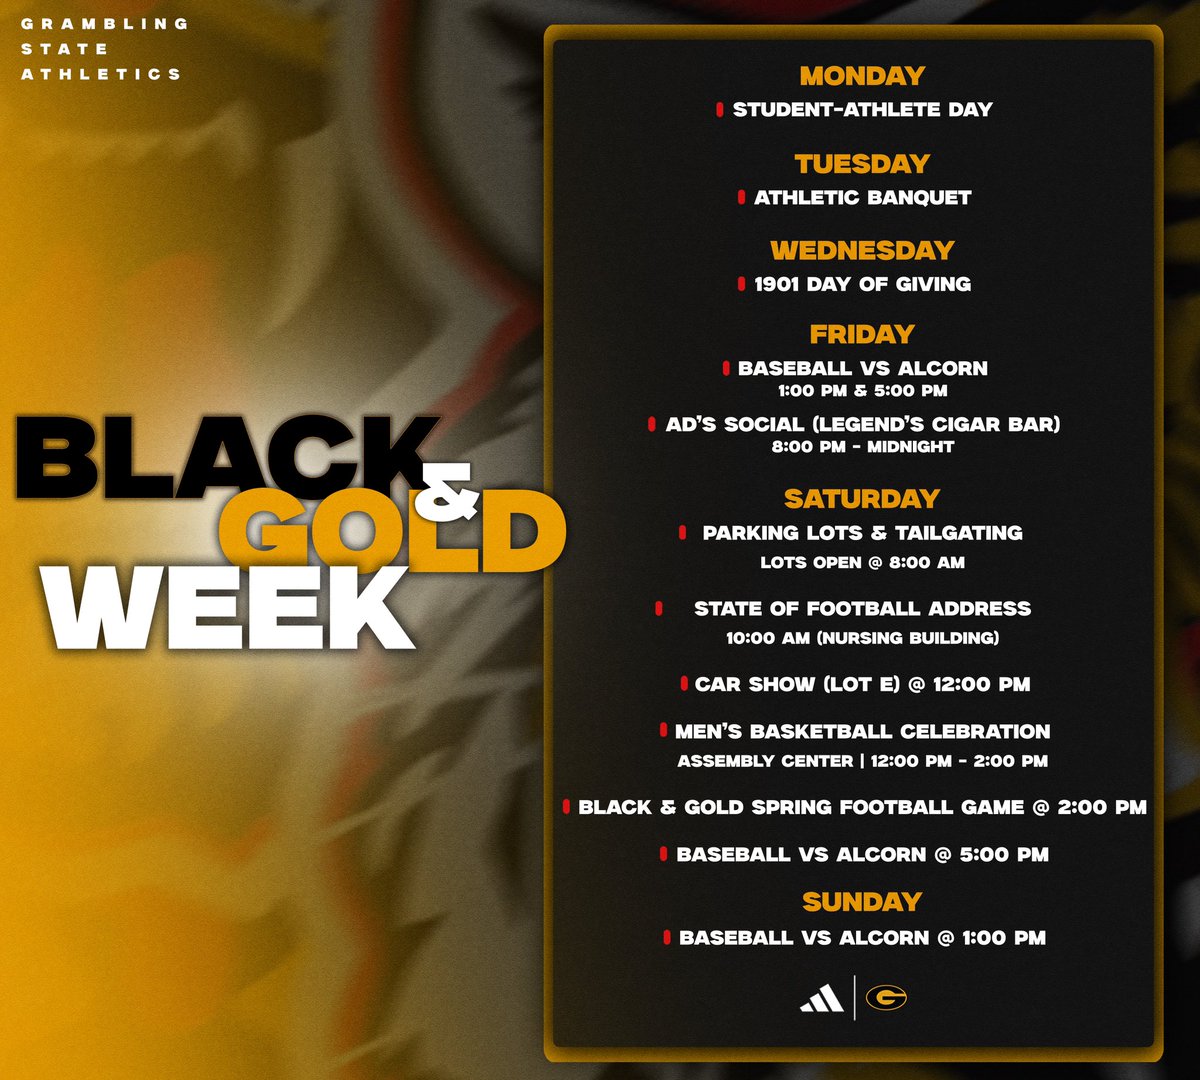 #GramFam We can’t wait to see you on campus next week for Black and Gold Week! Spring Game tickets are still on sale at gsutigers.com 🐯🏈⚾️ #ThisIsTheG